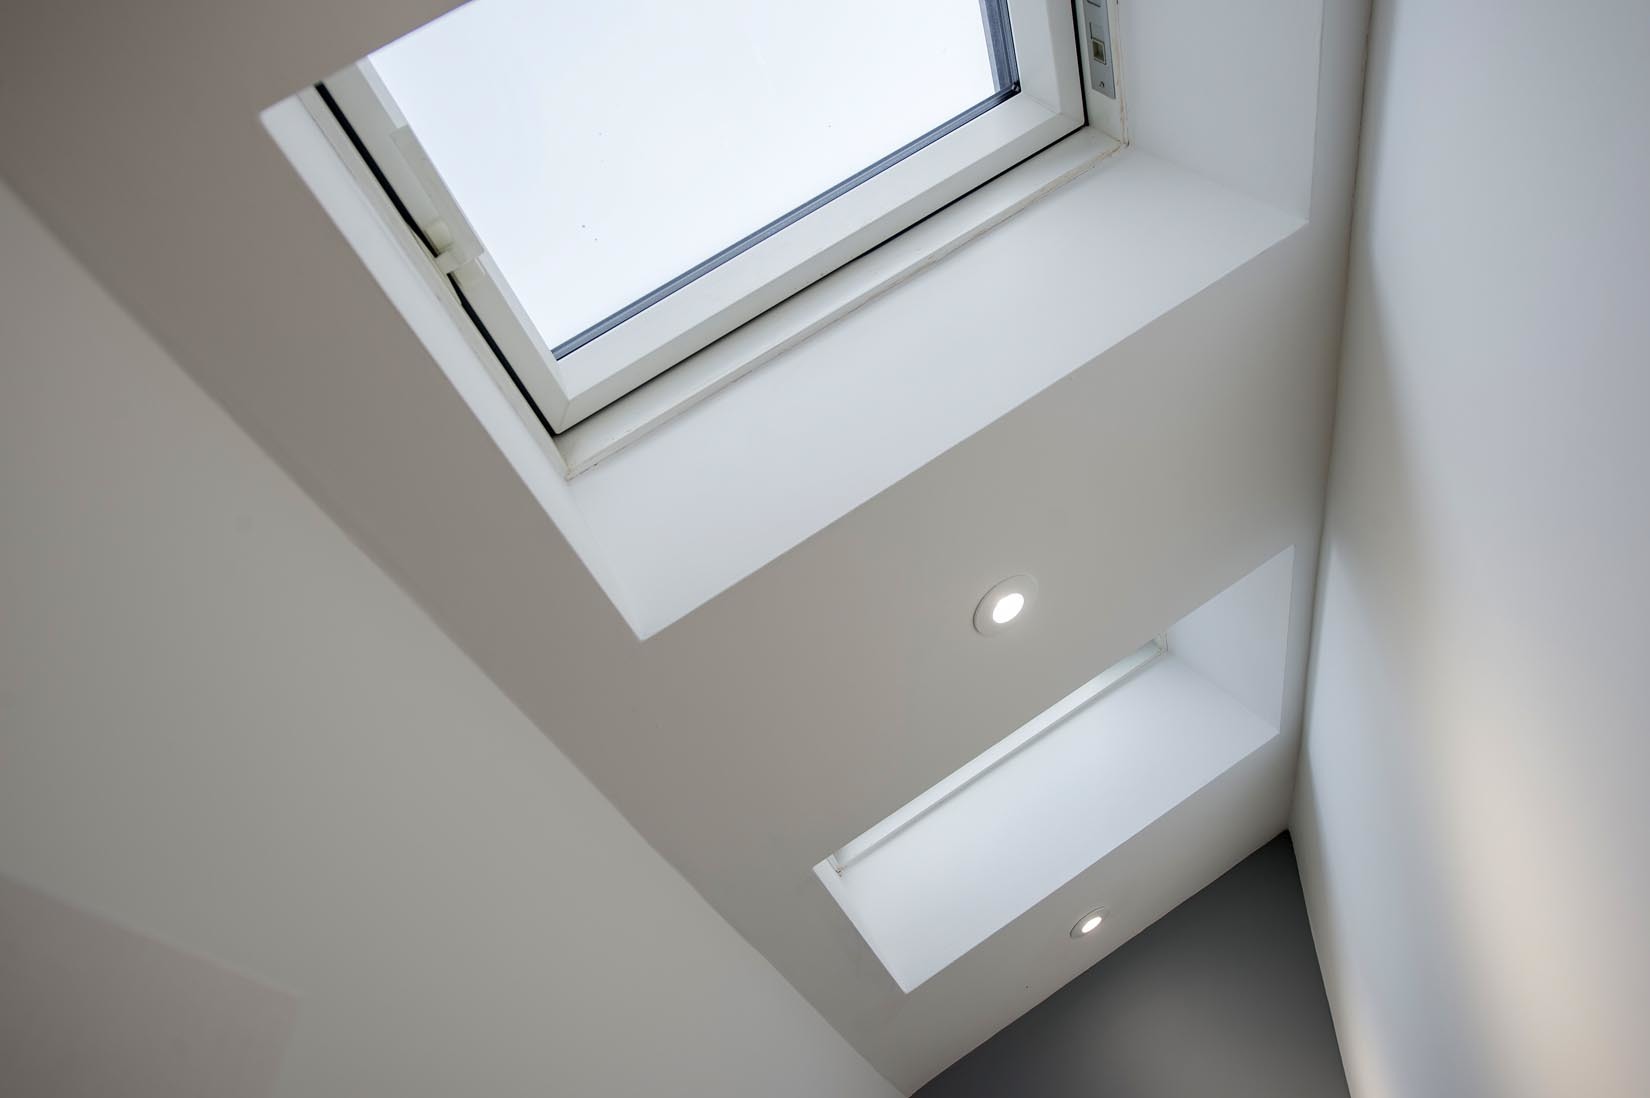 Rooflights in the side extension give additional natural light